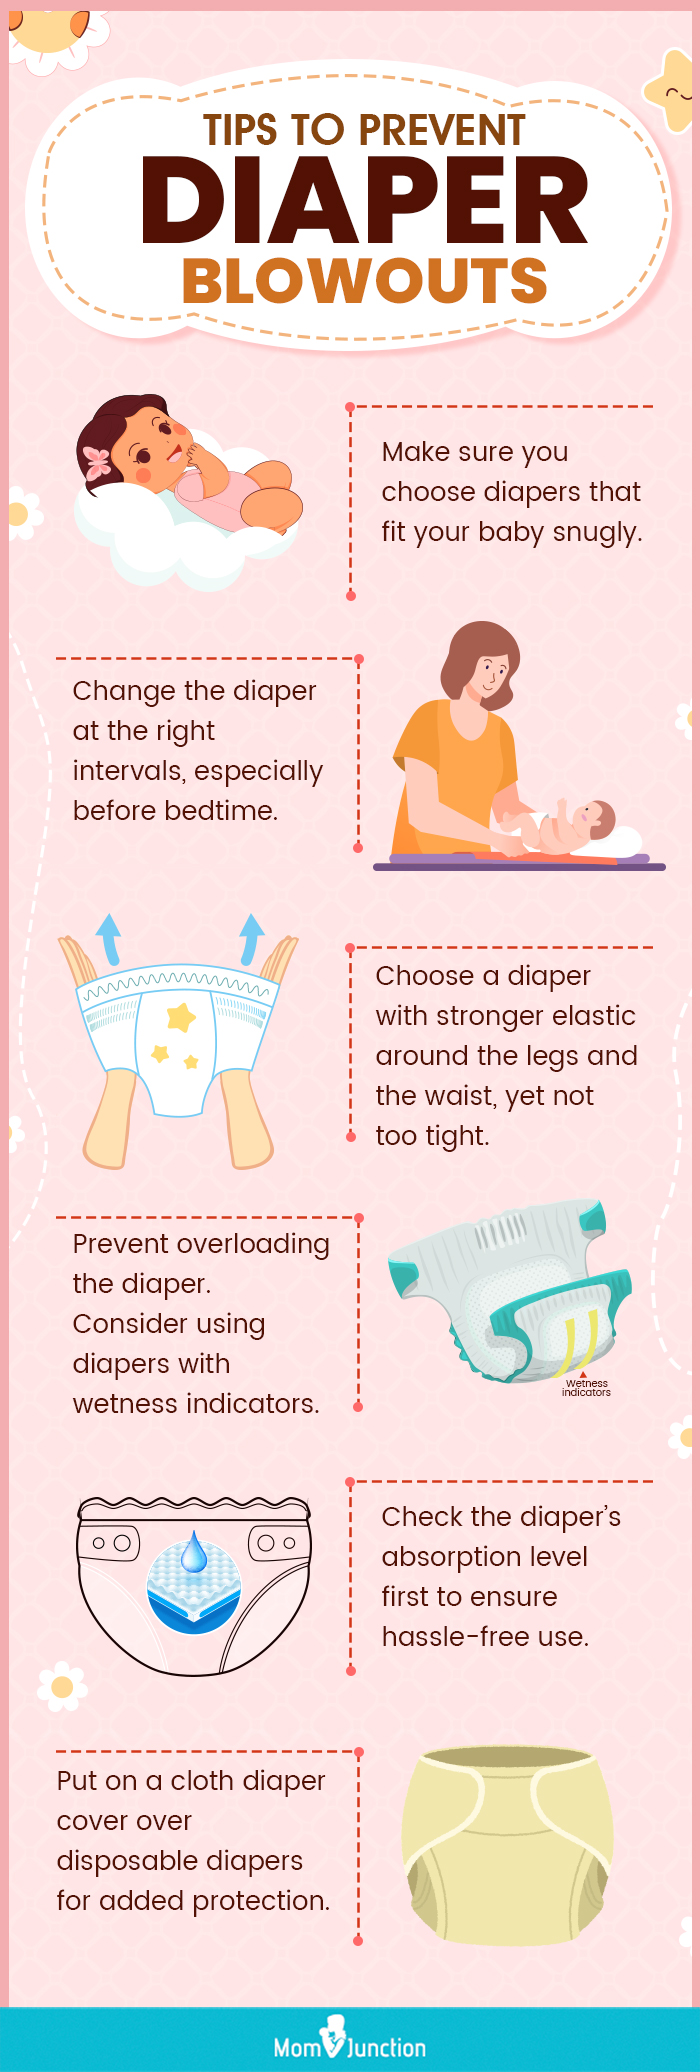 Tips To Prevent Diaper Blowouts (infographic)